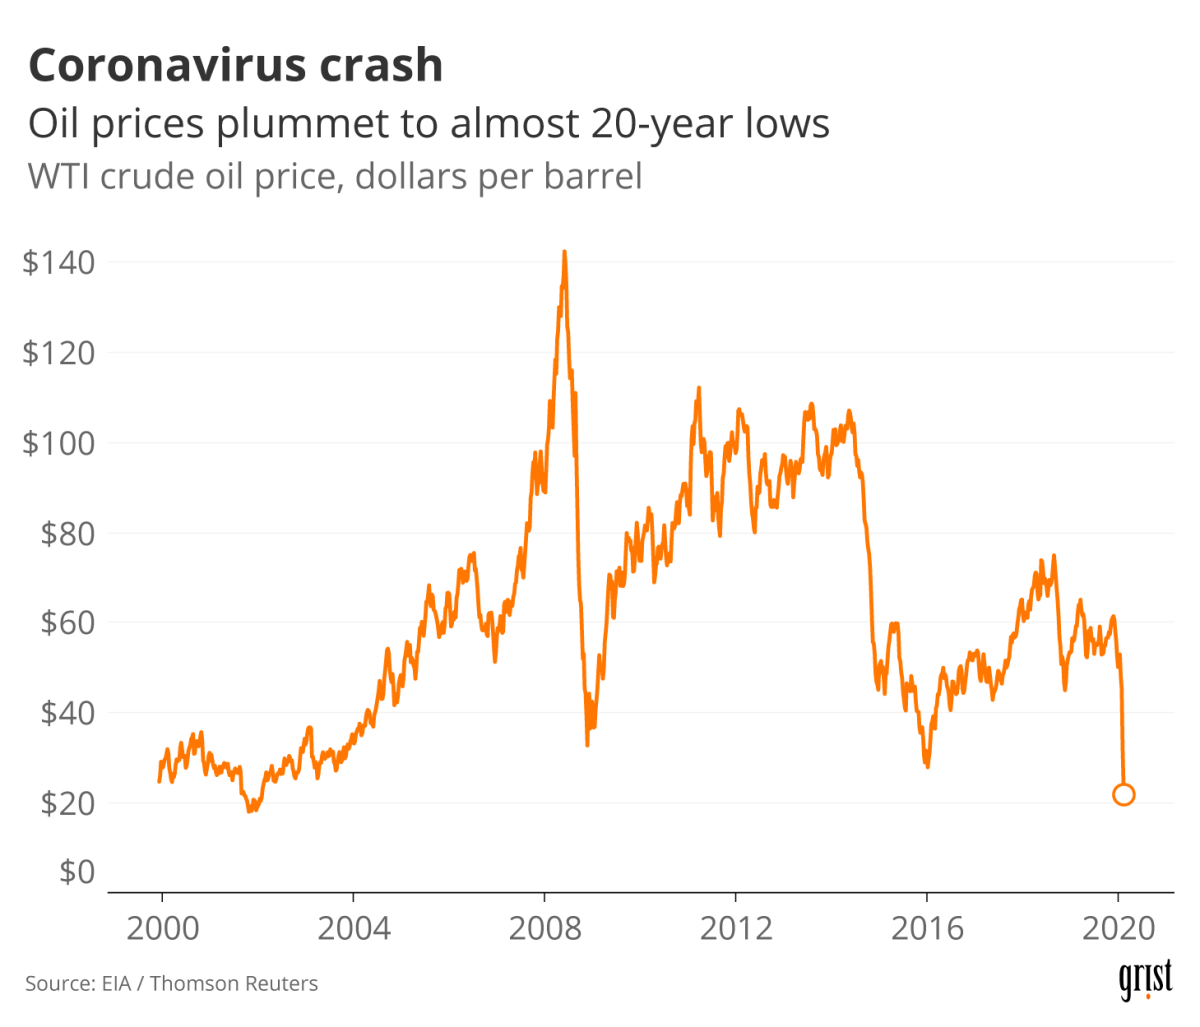 A line chart showing oil prices since 2000 in dollars per barrel. In March 2020, prices hit a near-20-year low.